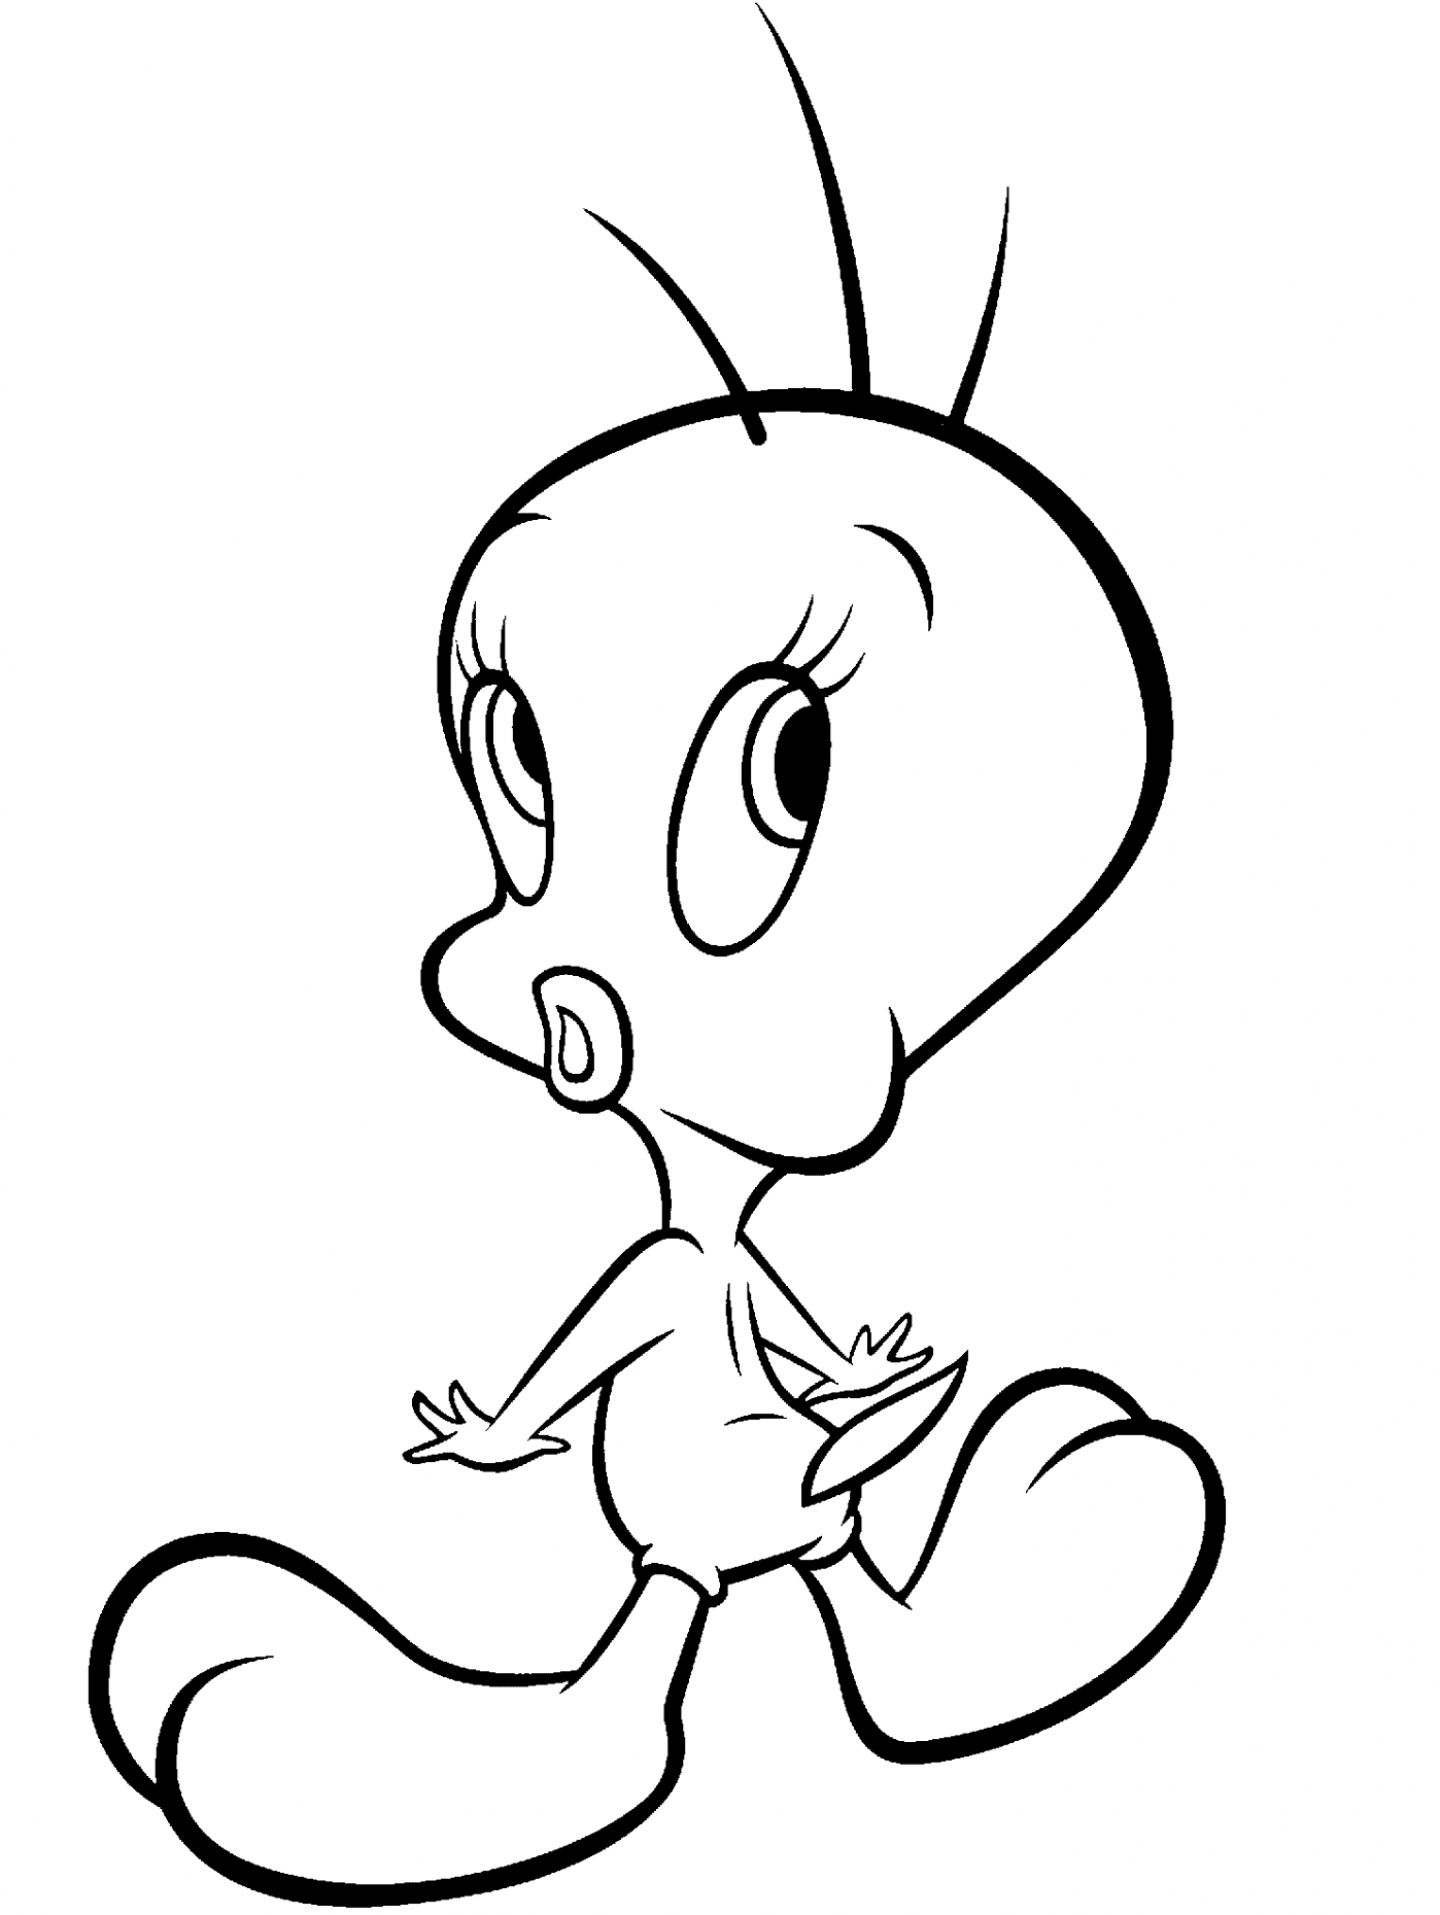 Tweety bird vector black and white clipart 2 image #18305